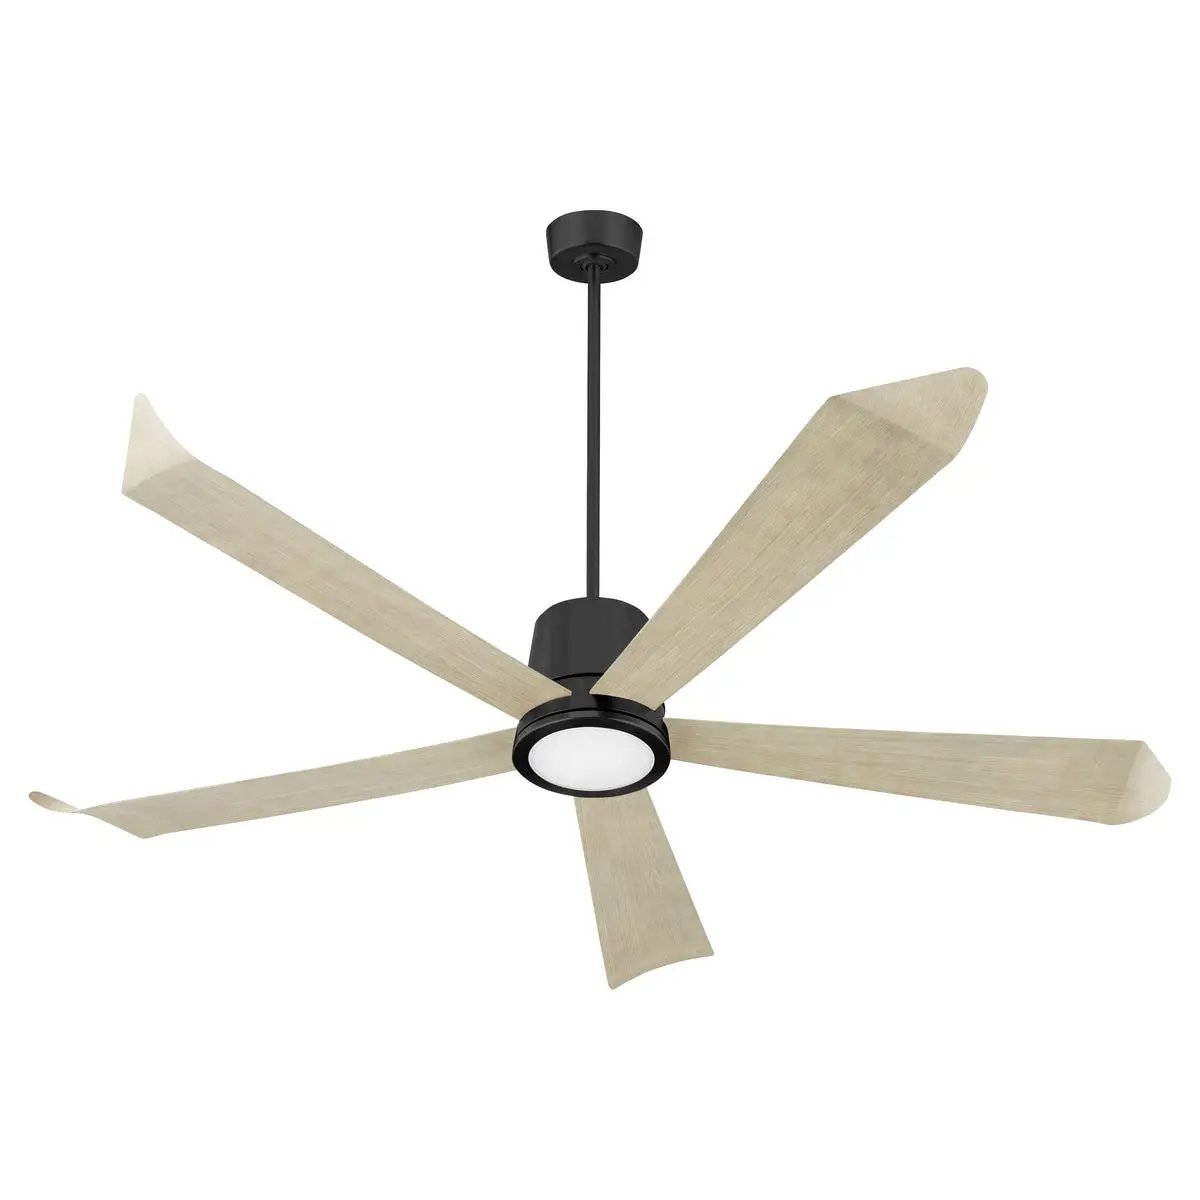 A Quorum International Smart Ceiling Fan with elongated blades and optional light kits. Perfect for any setting.